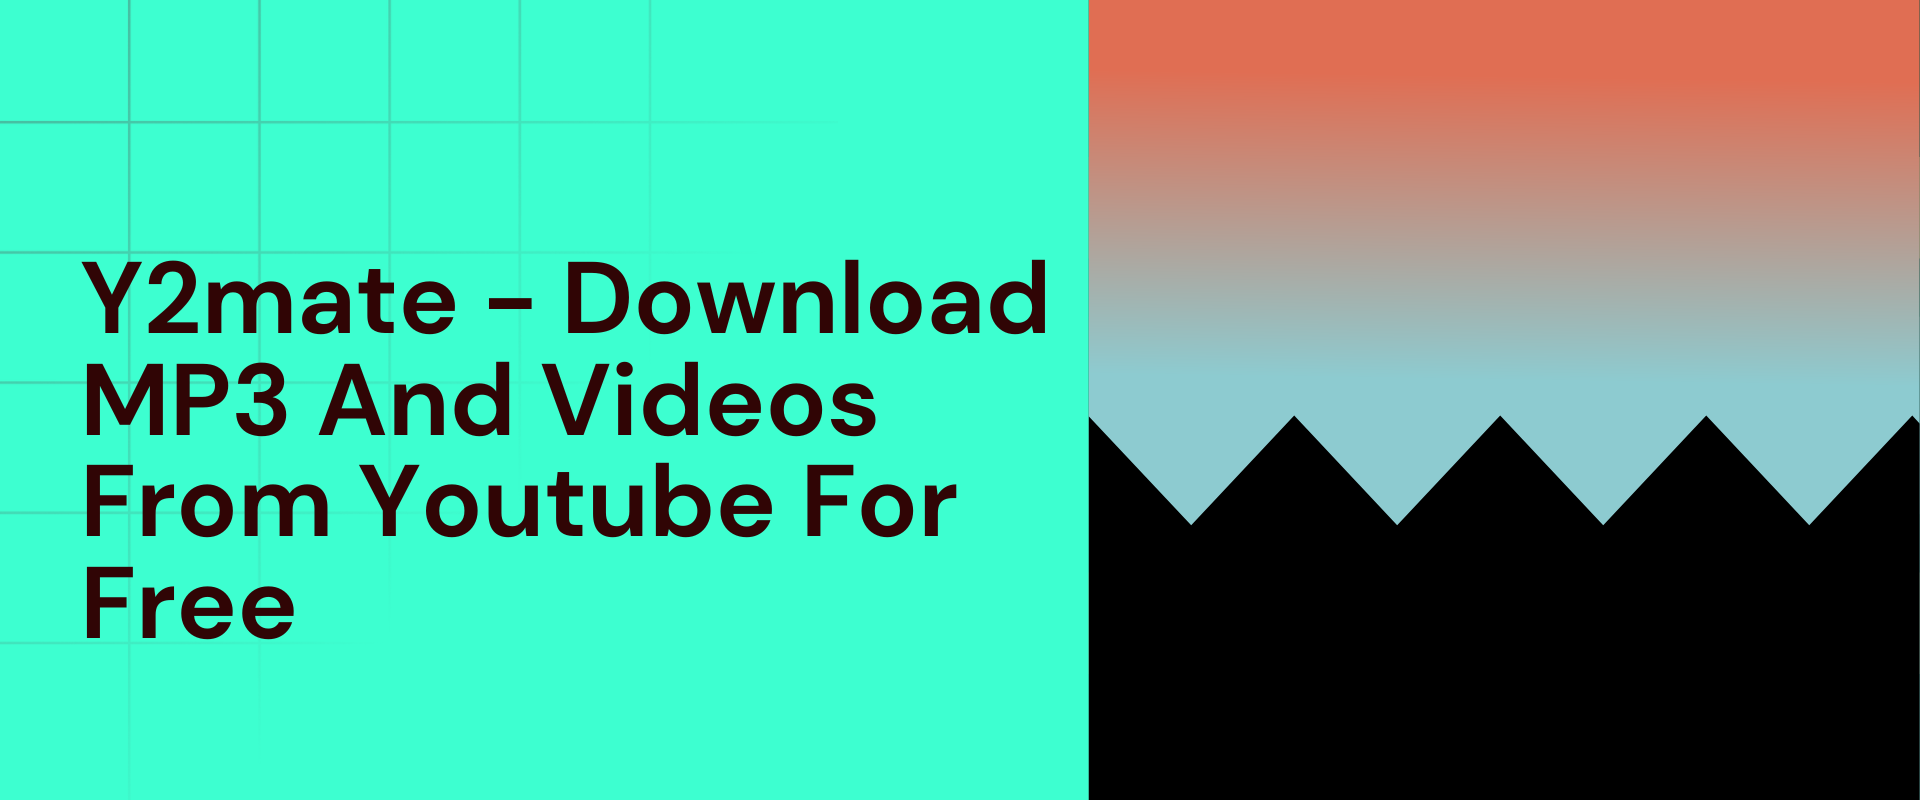 Y2mate – Download MP3 And Videos From Youtube For Free